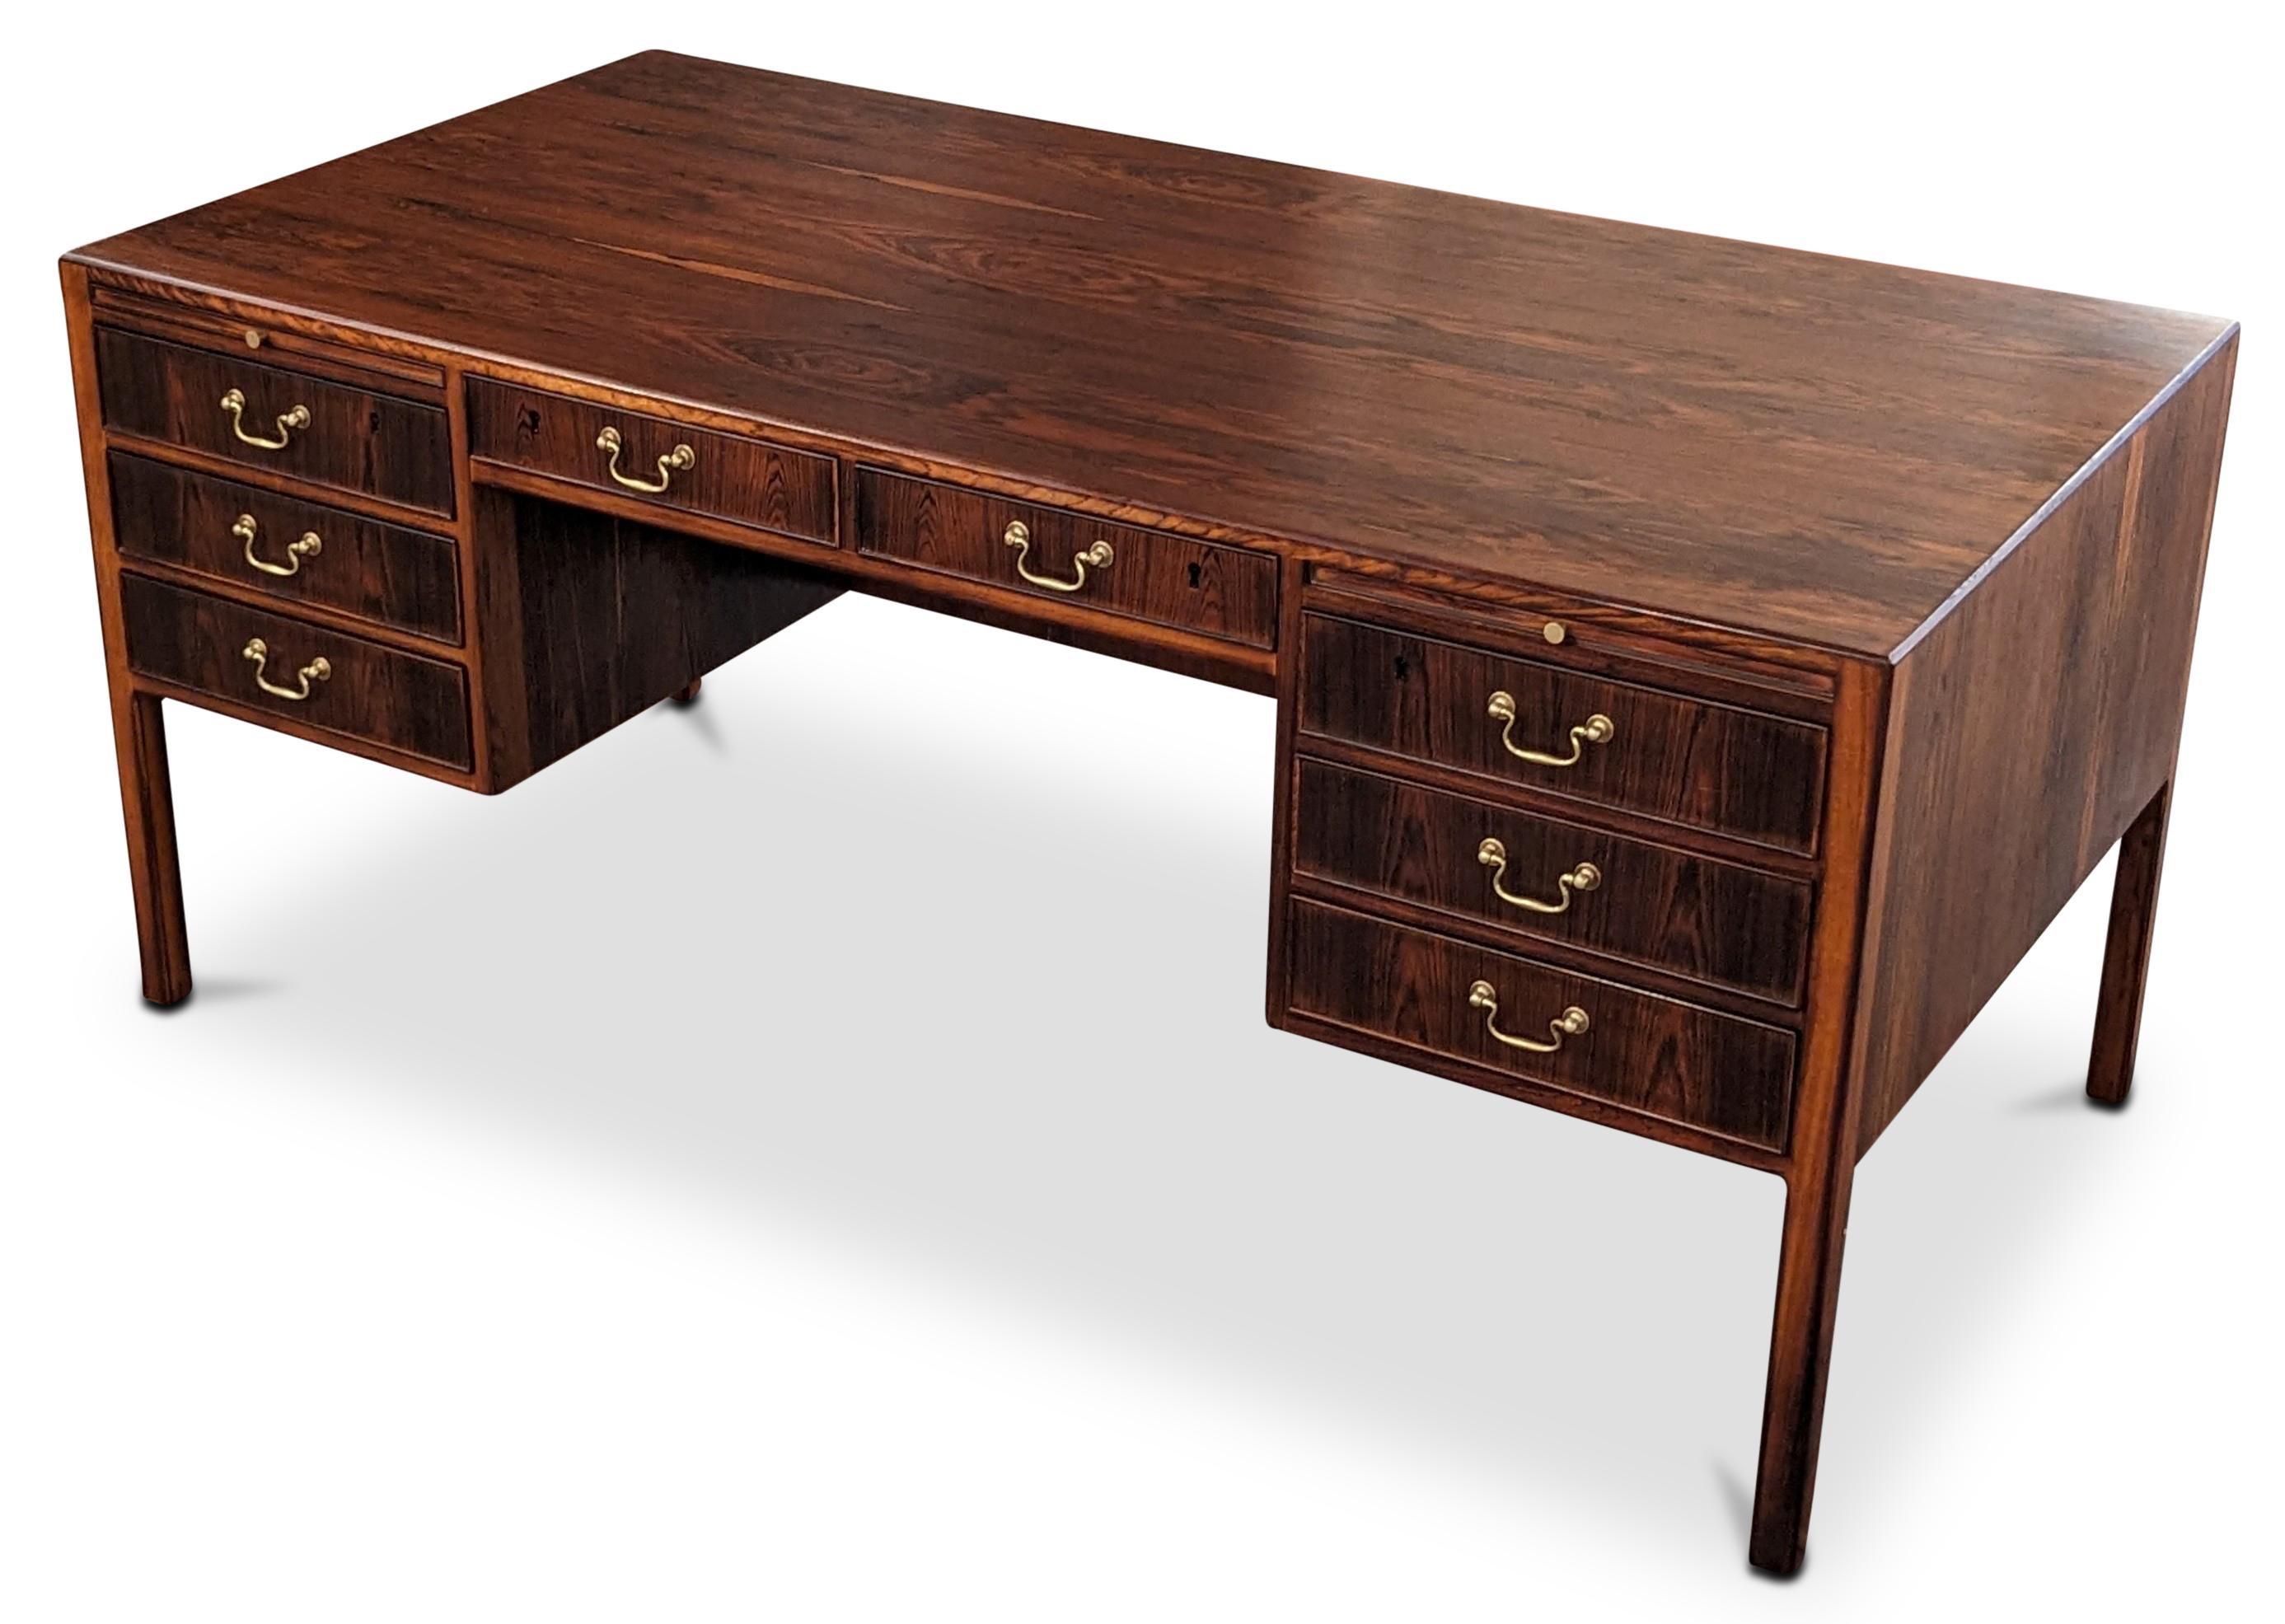 Mid-20th Century Ole Wancher Rosewood Desk - 0823177 Vintage Danish Mid Century For Sale